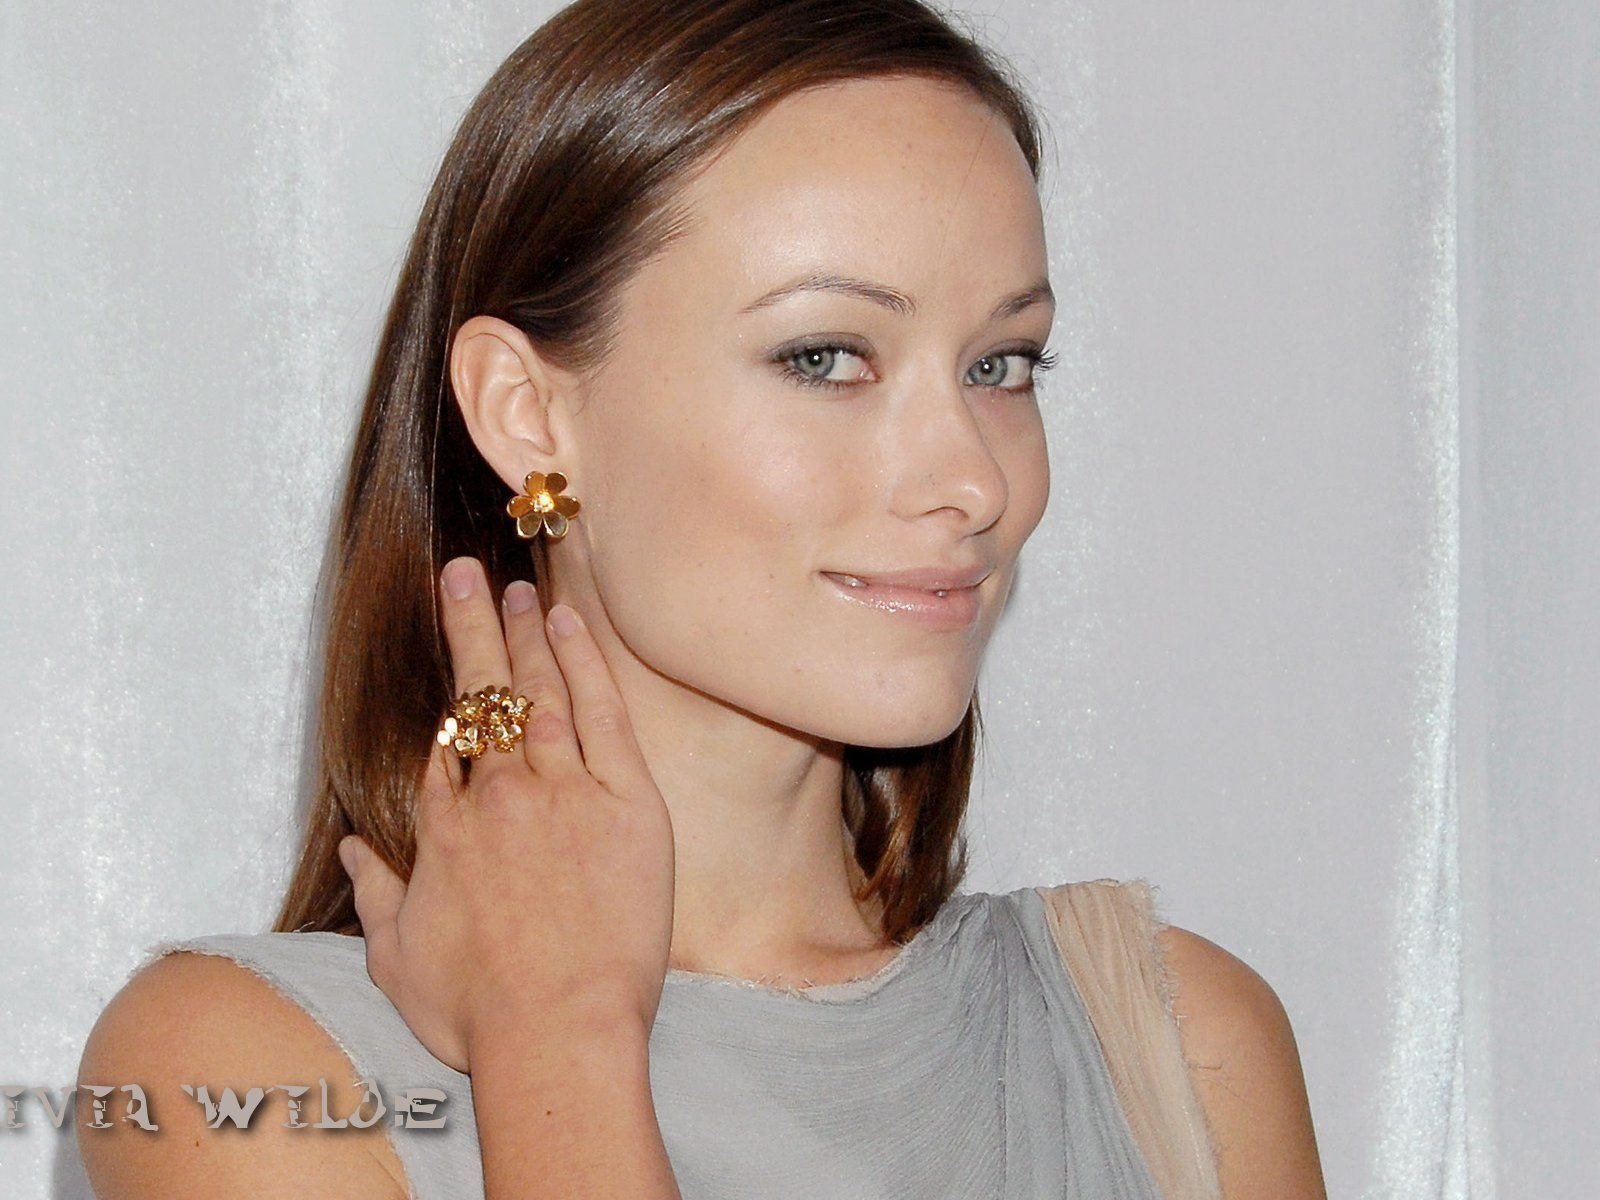 Olivia Wilde #046 - 1600x1200 Wallpapers Pictures Photos Images